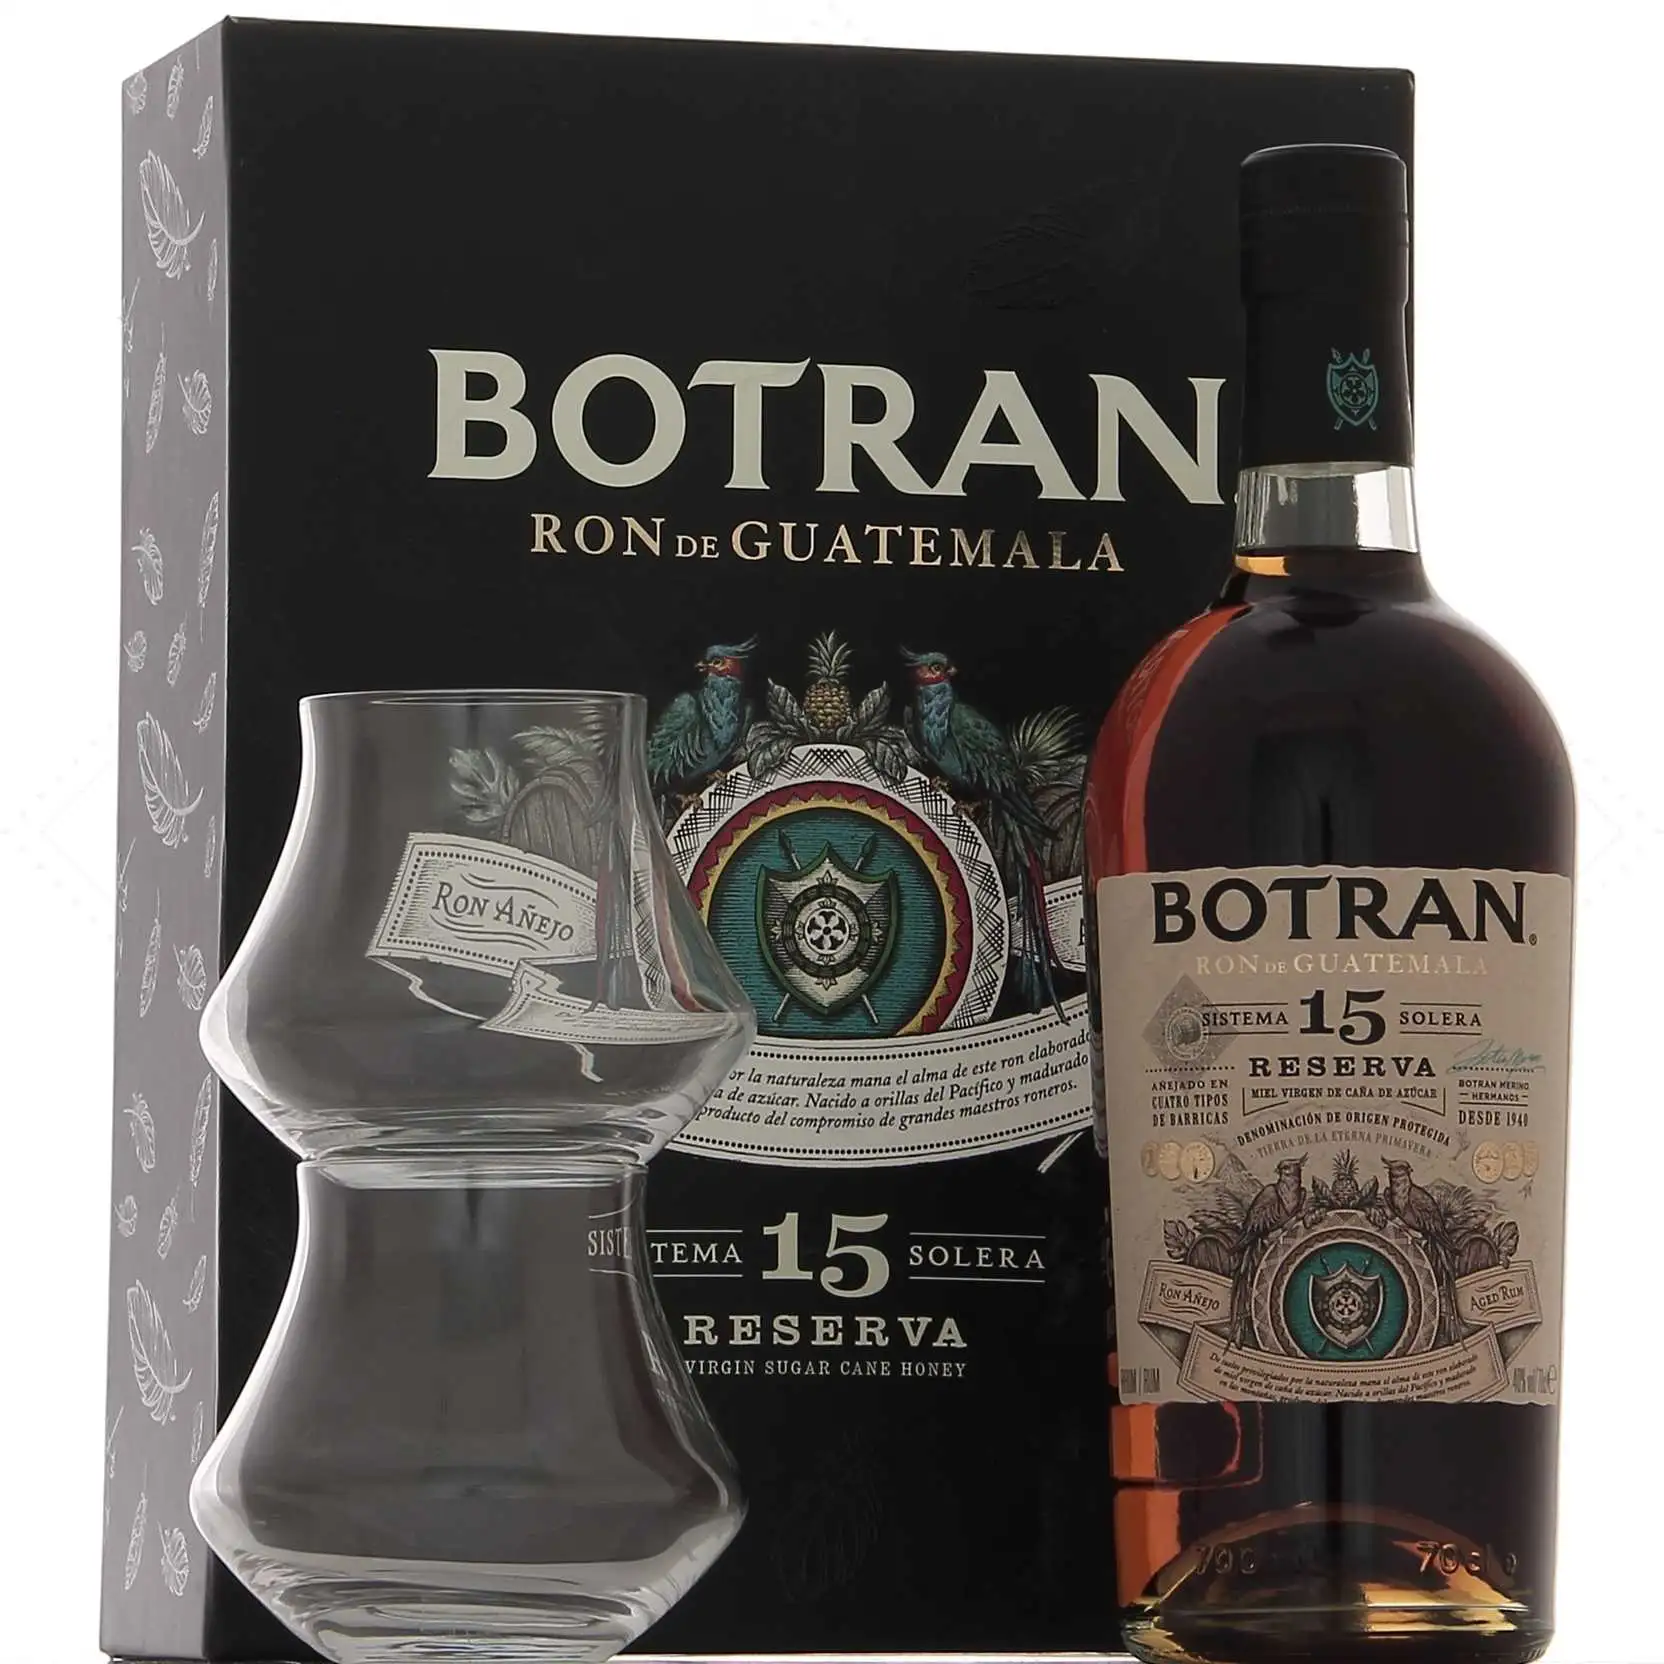 Image of the front of the bottle of the rum Botran Anejo Sistema Solera 15